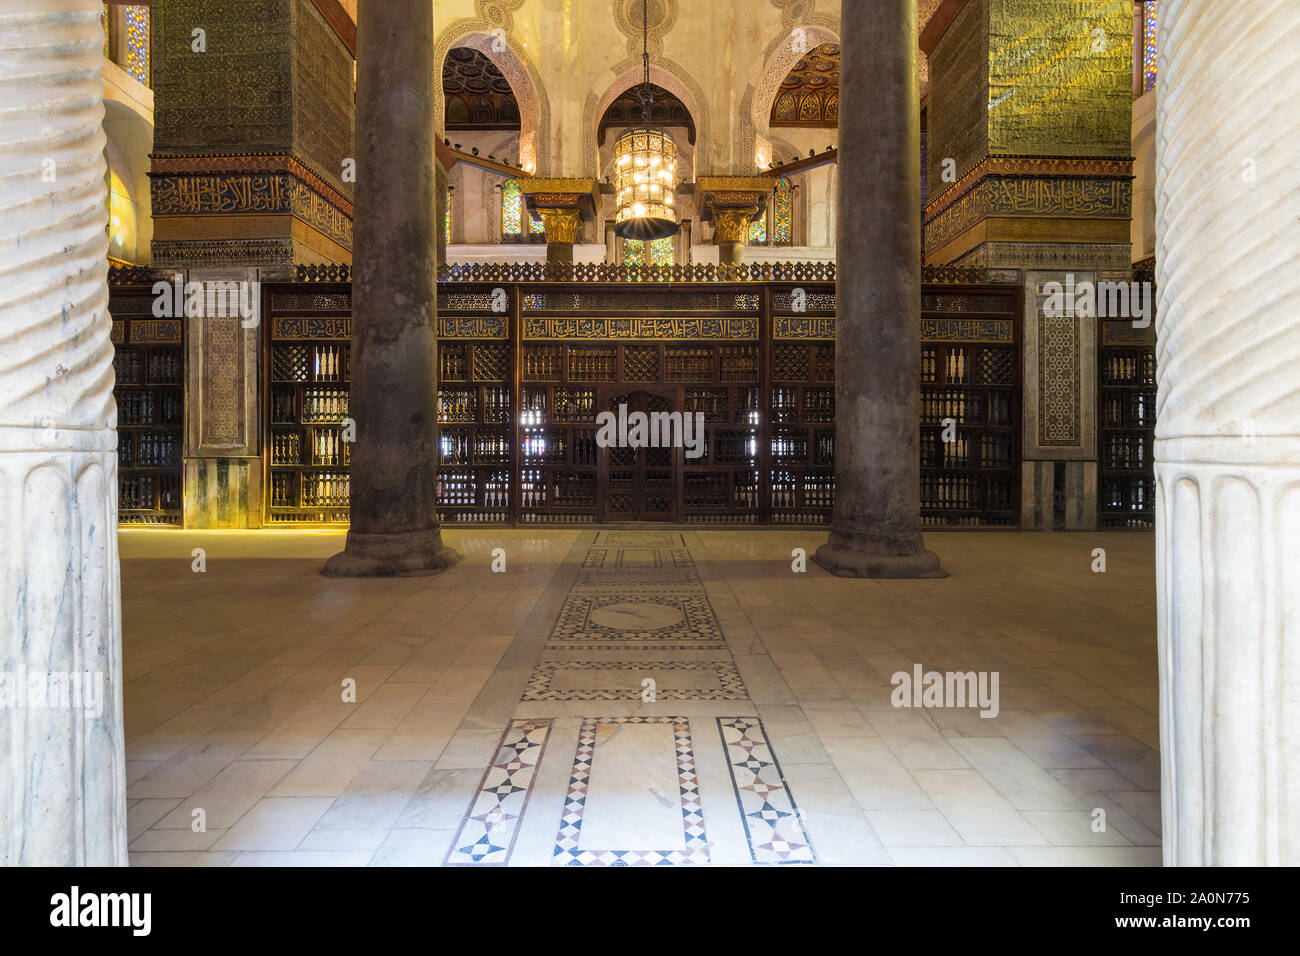 Interior view of the mausoleum of Sultan Qalawun, part of Sultan Qalawun Complex built in 1285 AD, located in Al Moez Street, Cairo, Egypt Stock Photo